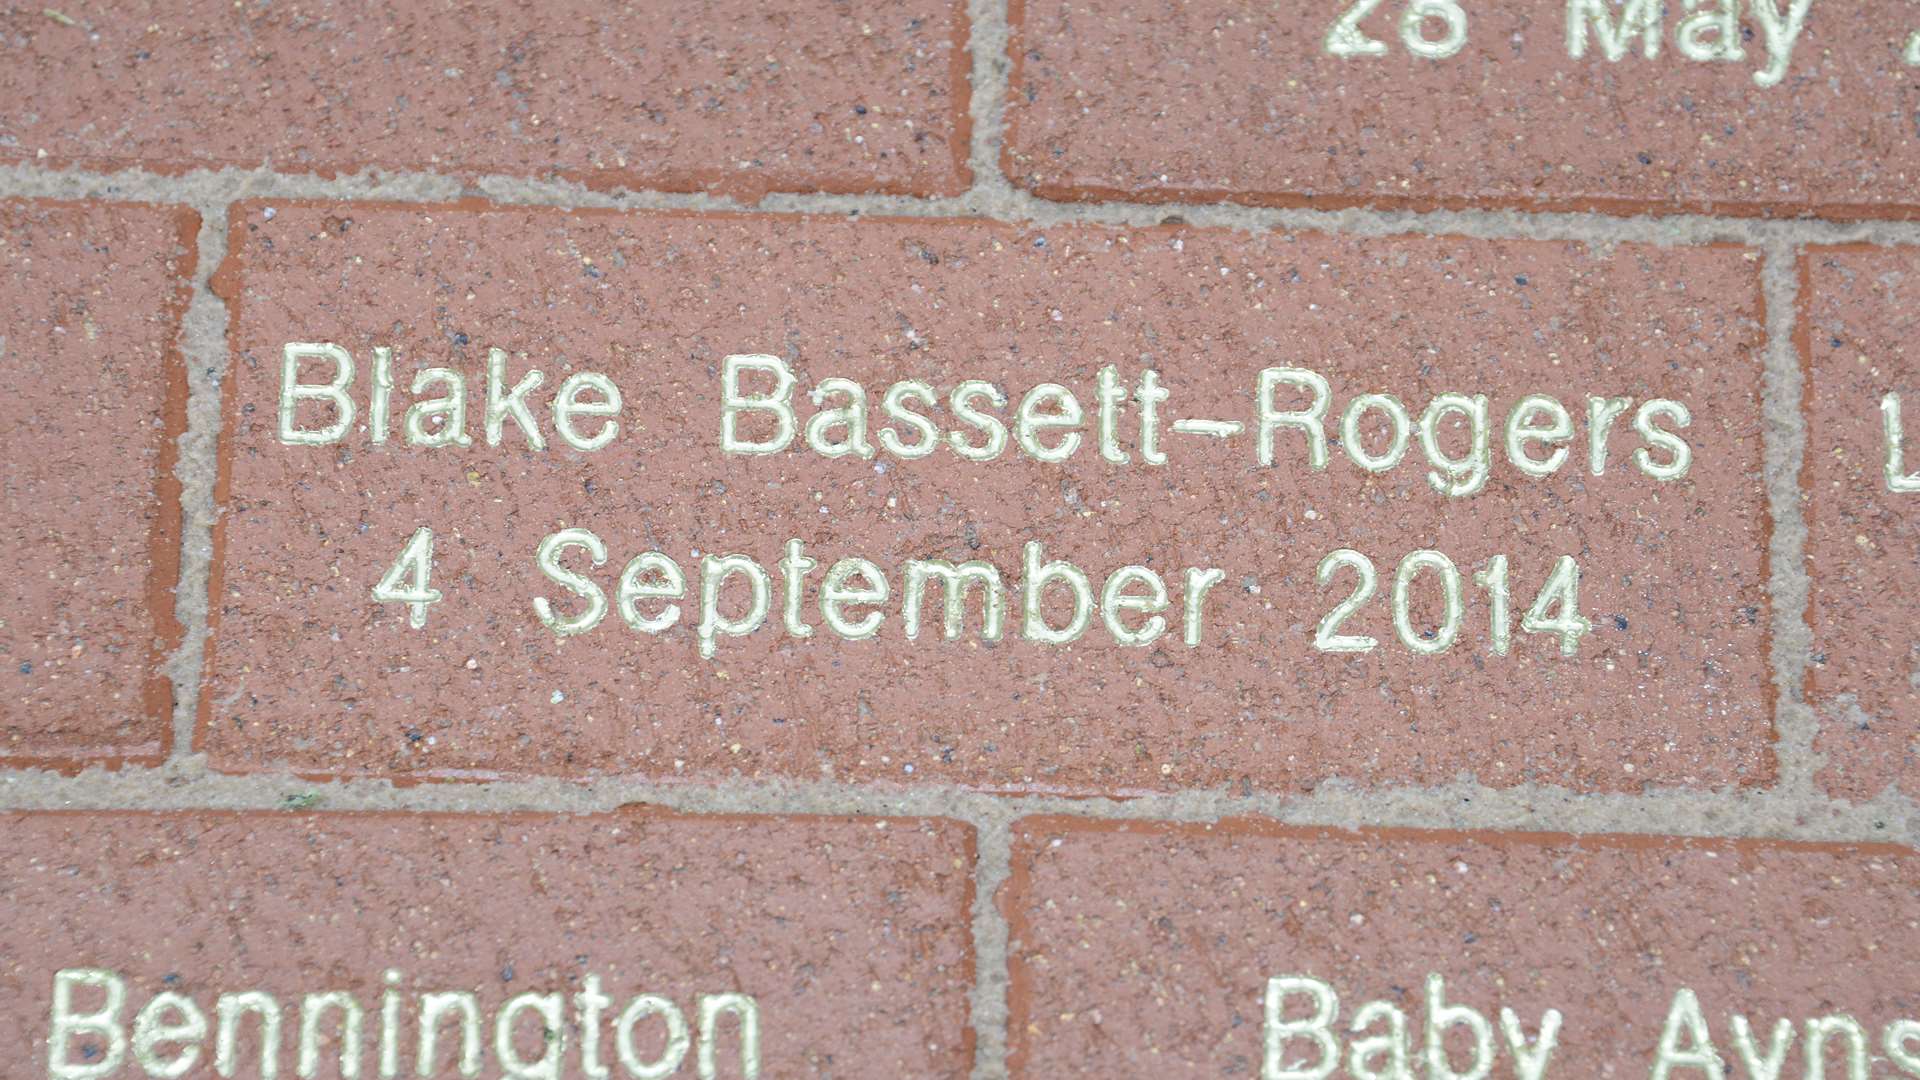 Charlotte has placed a stone for Blake in the Ashford Baby Garden